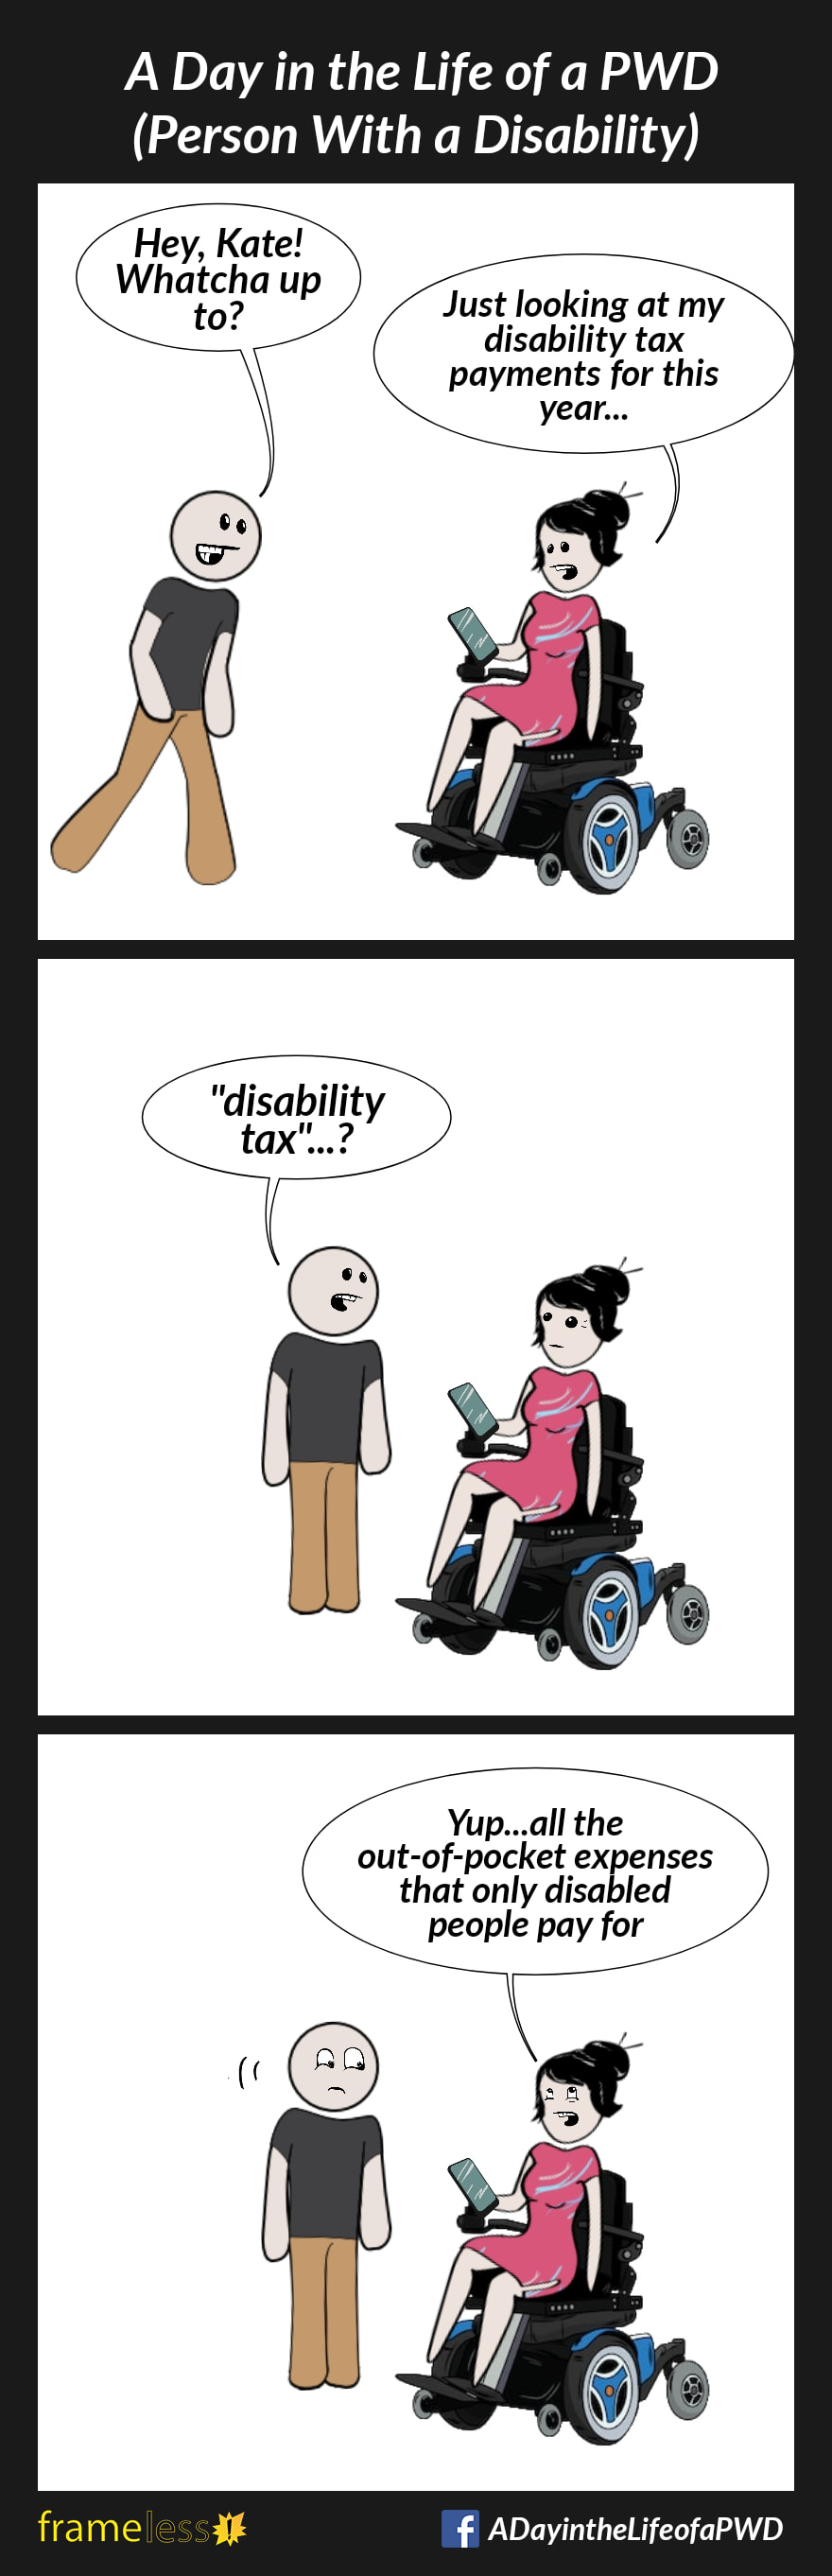 COMIC STRIP 
A Day in the Life of a PWD (Person With a Disability) 

Frame 1:
A woman in a power wheelchair is looking at her phone. A man approaches.
MAN: Hey, Kate! Whatcha up to?
WOMAN: Just looking at my disability tax payments for this year

Frame 2:
MAN: 